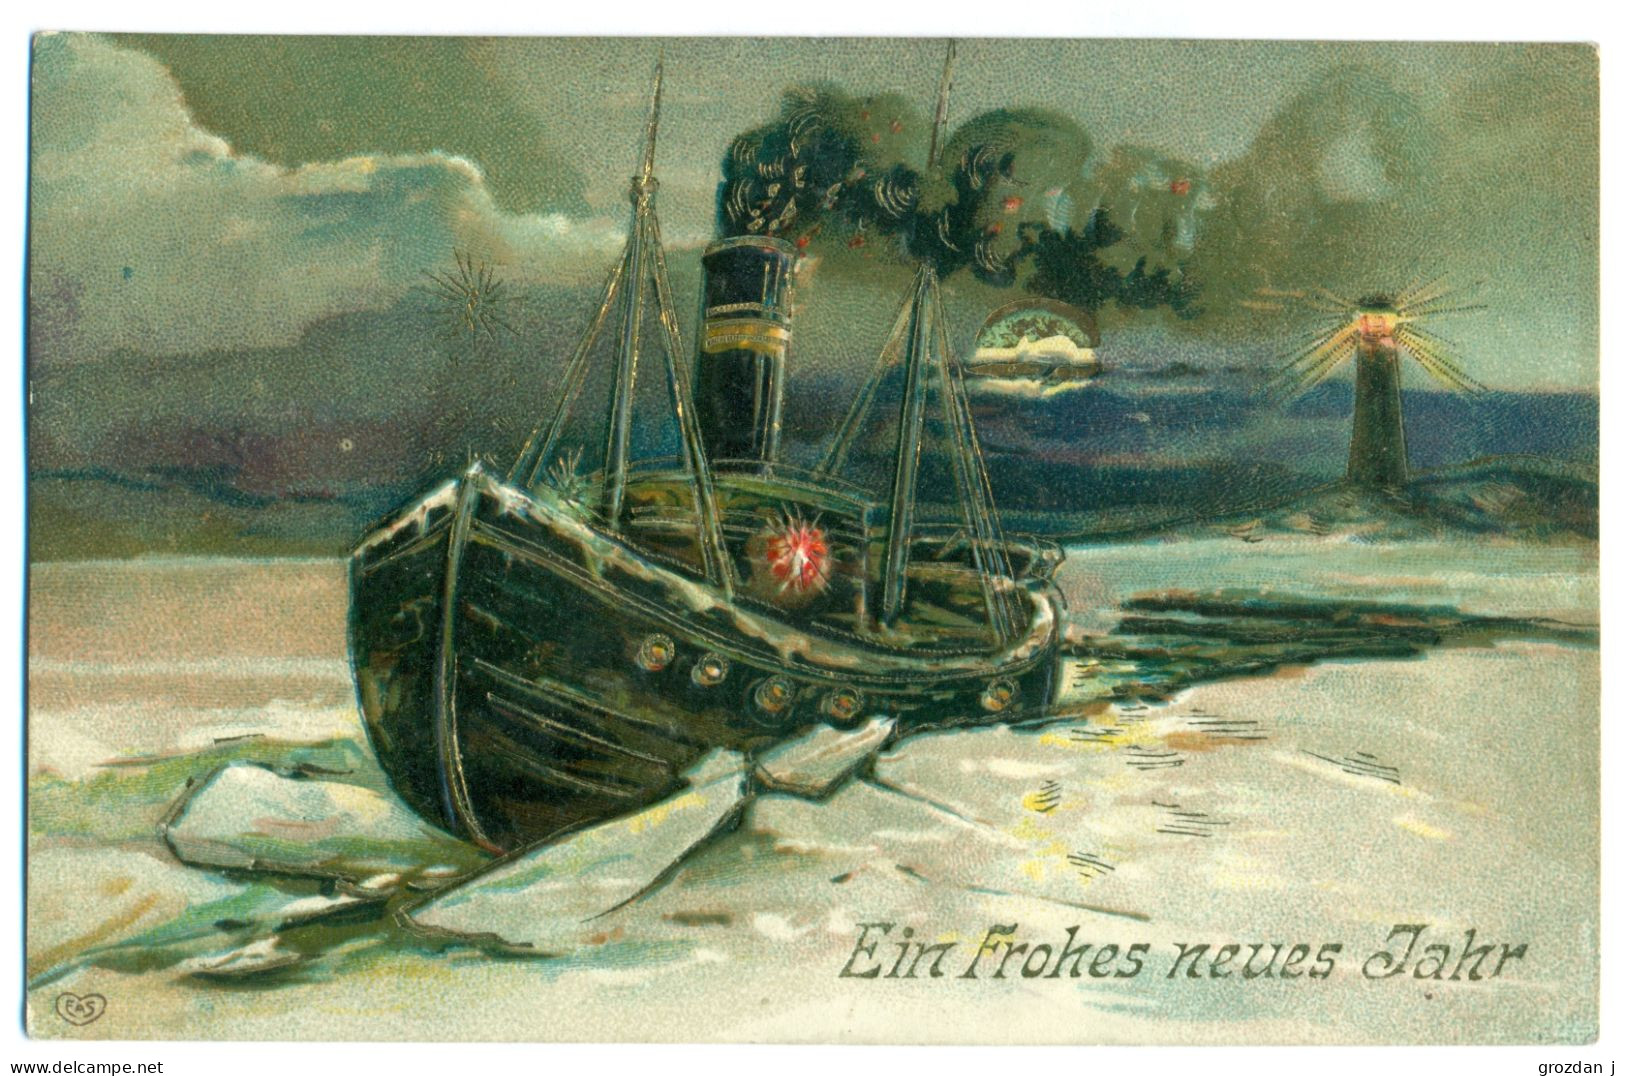 Lot No 16, 22 old cards, mostly New Year's and Christmas postcards from Germany and Austria, FREE REGISTERED SHIPPING